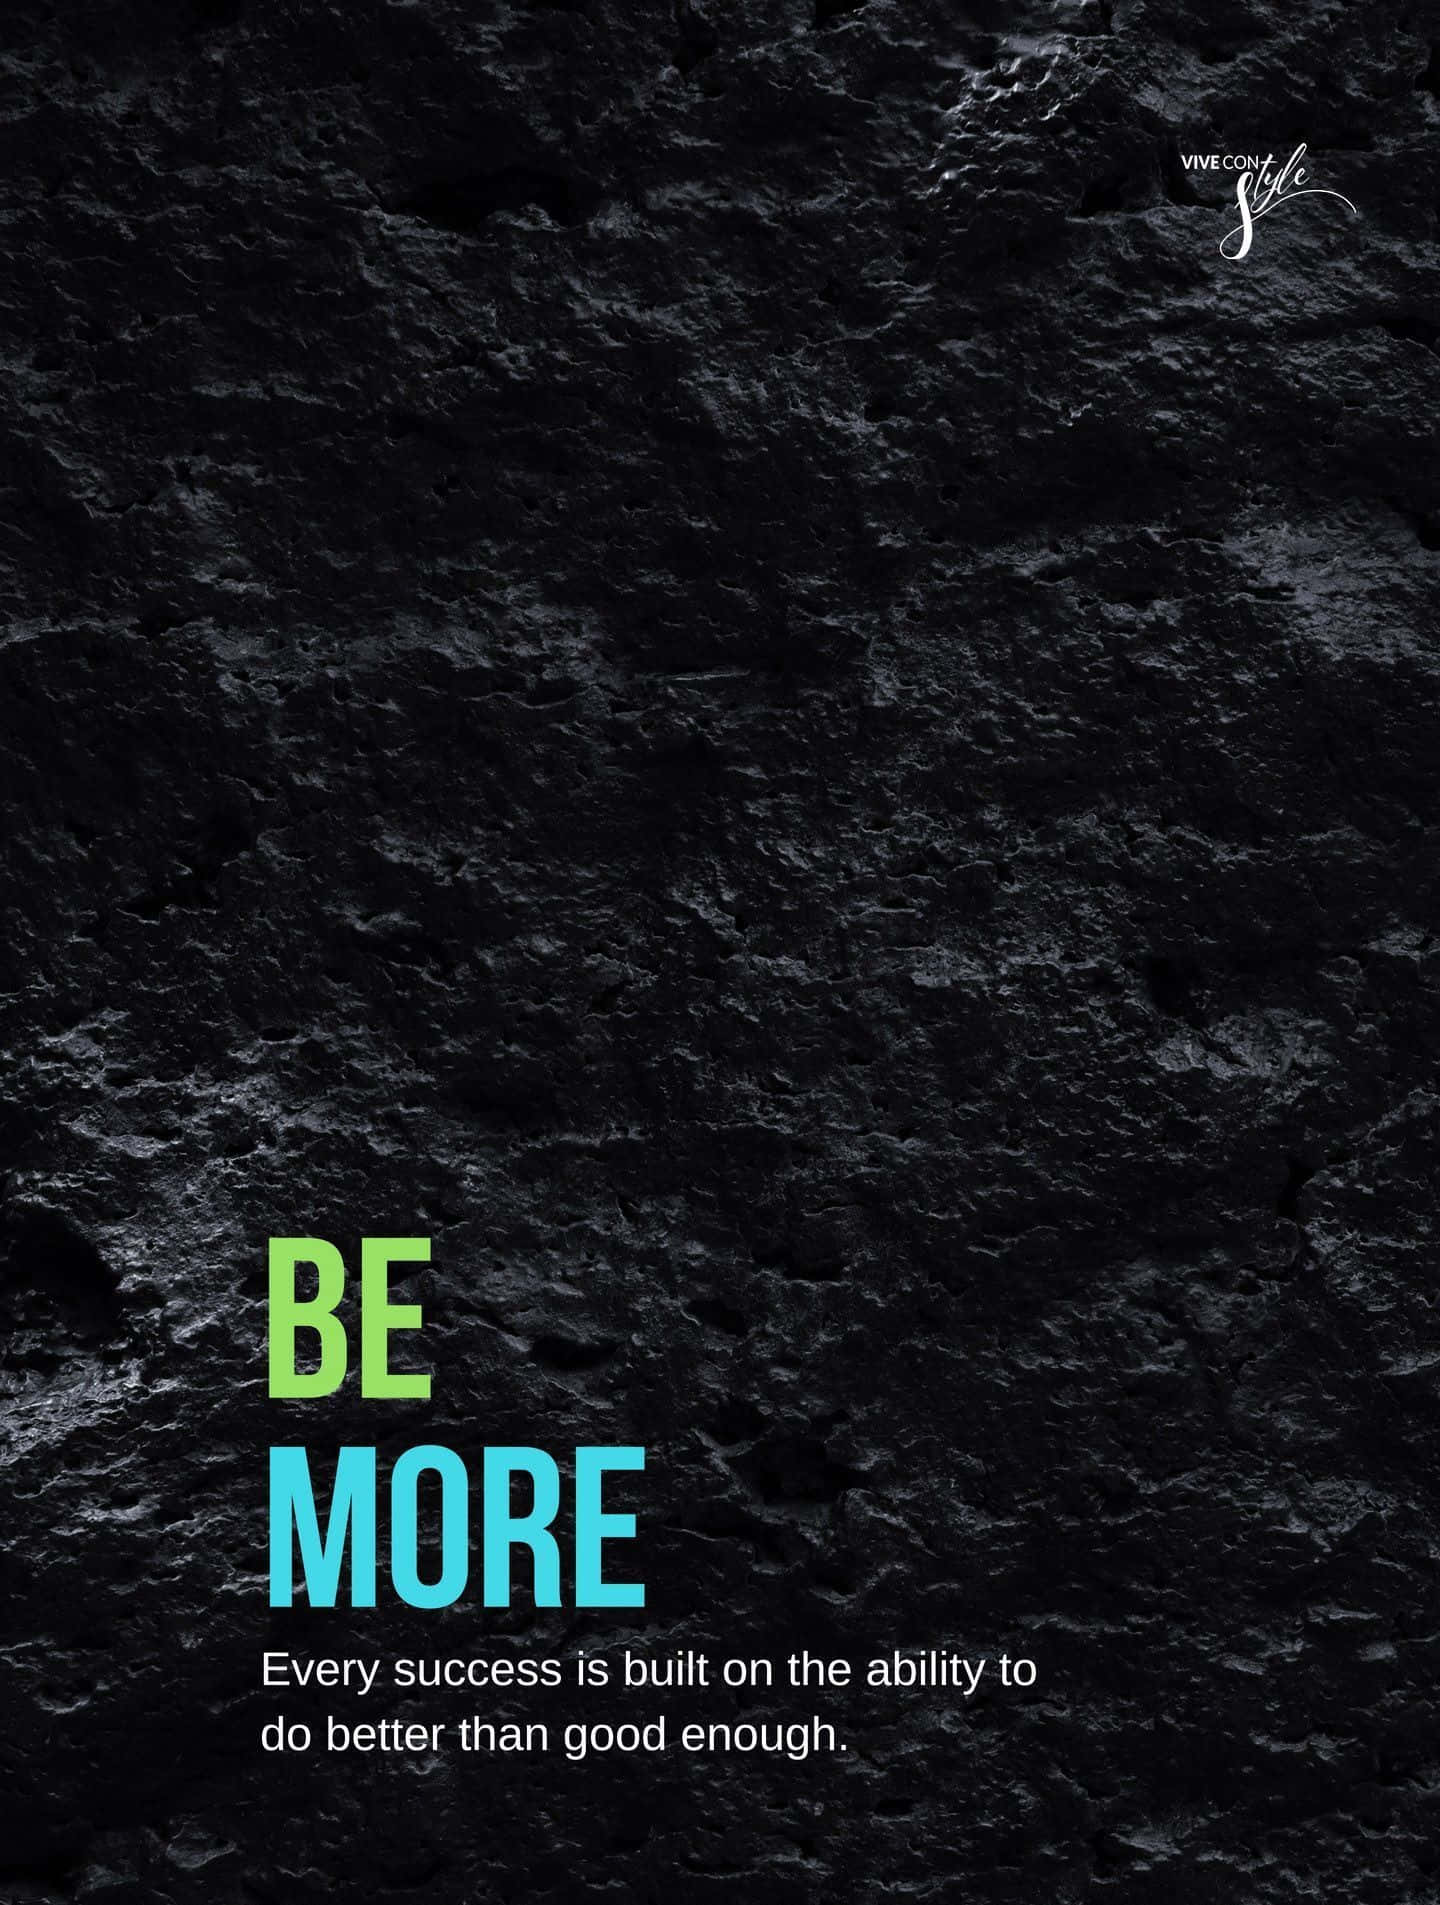 Be More - Motivational Poster